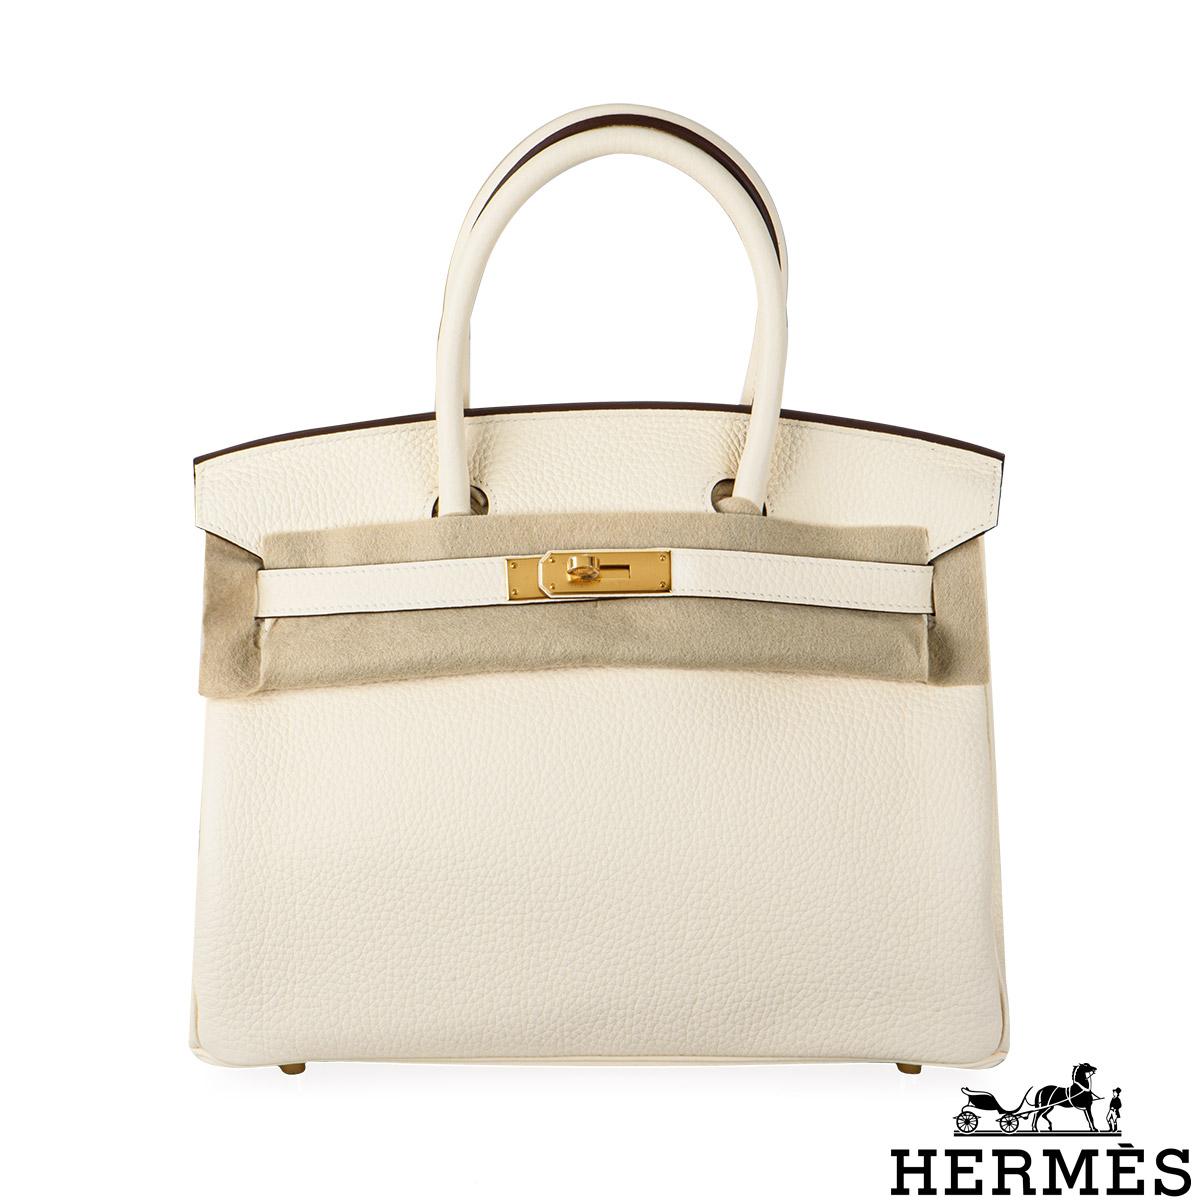 A breathtaking Hermès 30cm Birkin bag. The exterior of this Birkin is in Nata Taurillon Clemence leather with tonal stitching. It features gold tone hardware with two straps and front toggle closure. The interior features a zip pocket with an Hermès